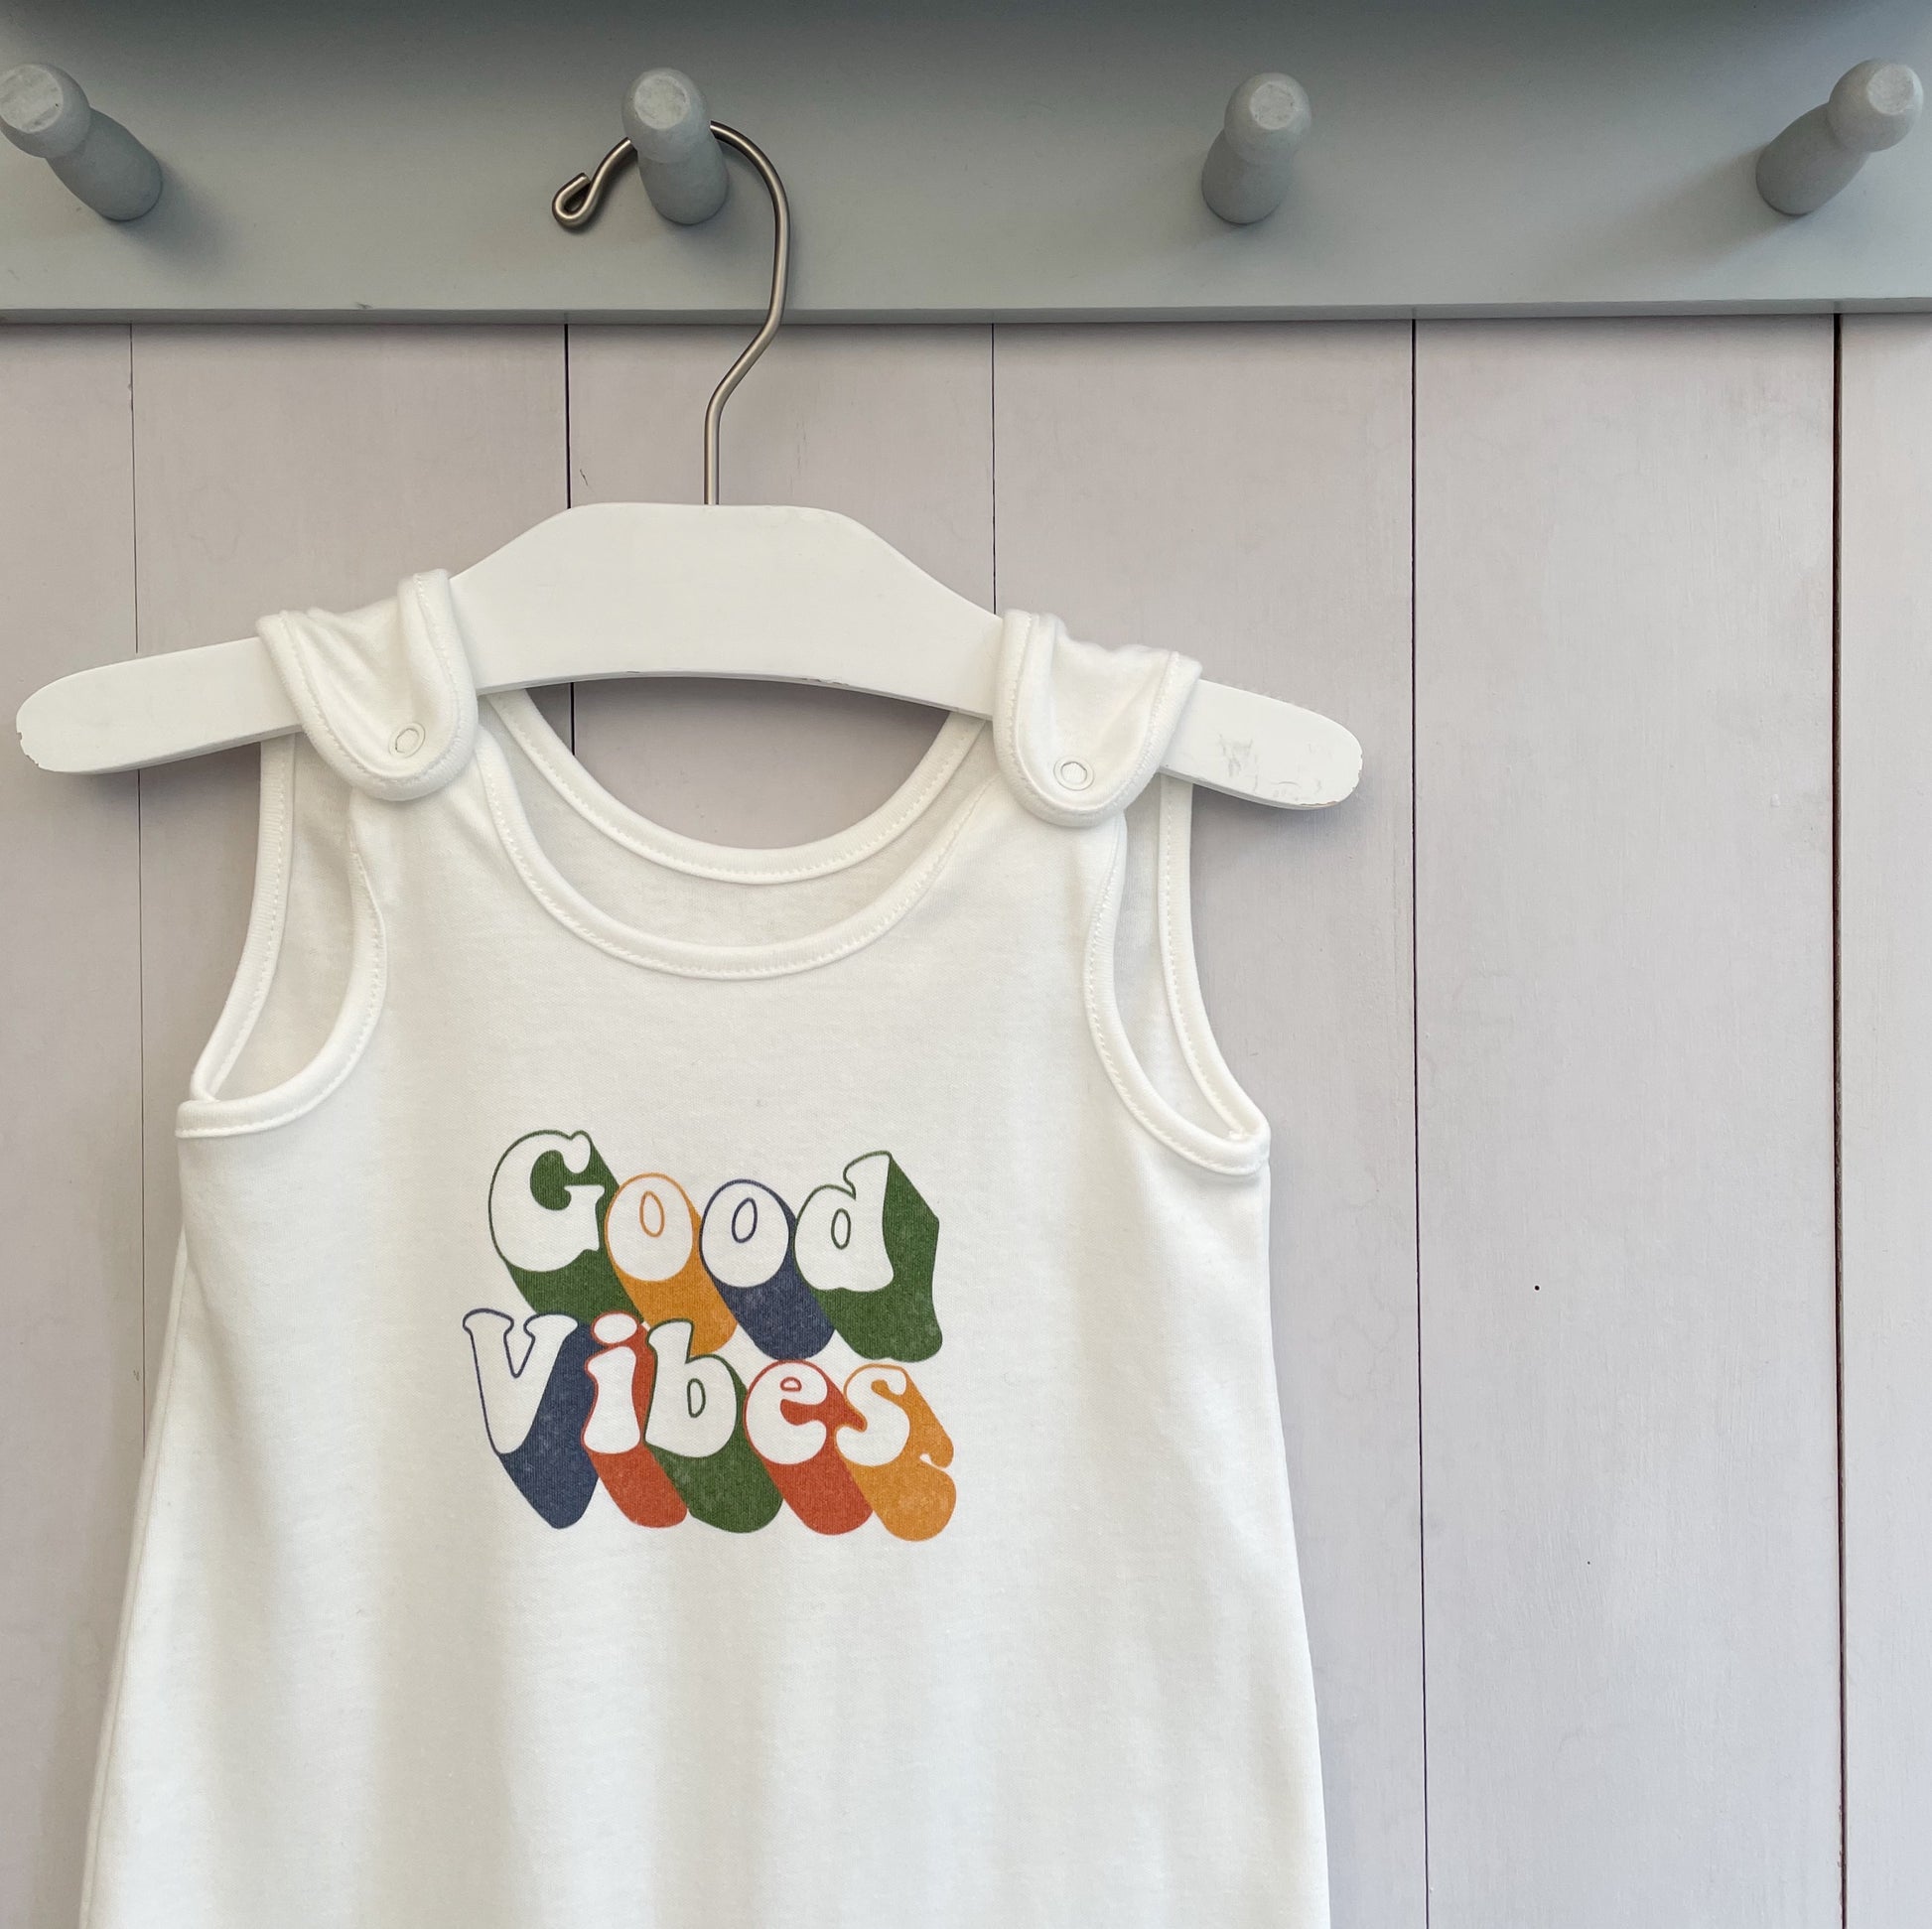 milk white baby romper with retro inspired quote 'good vibes'. super soft 100% organic baby clothing. perfect for new born baby gift 